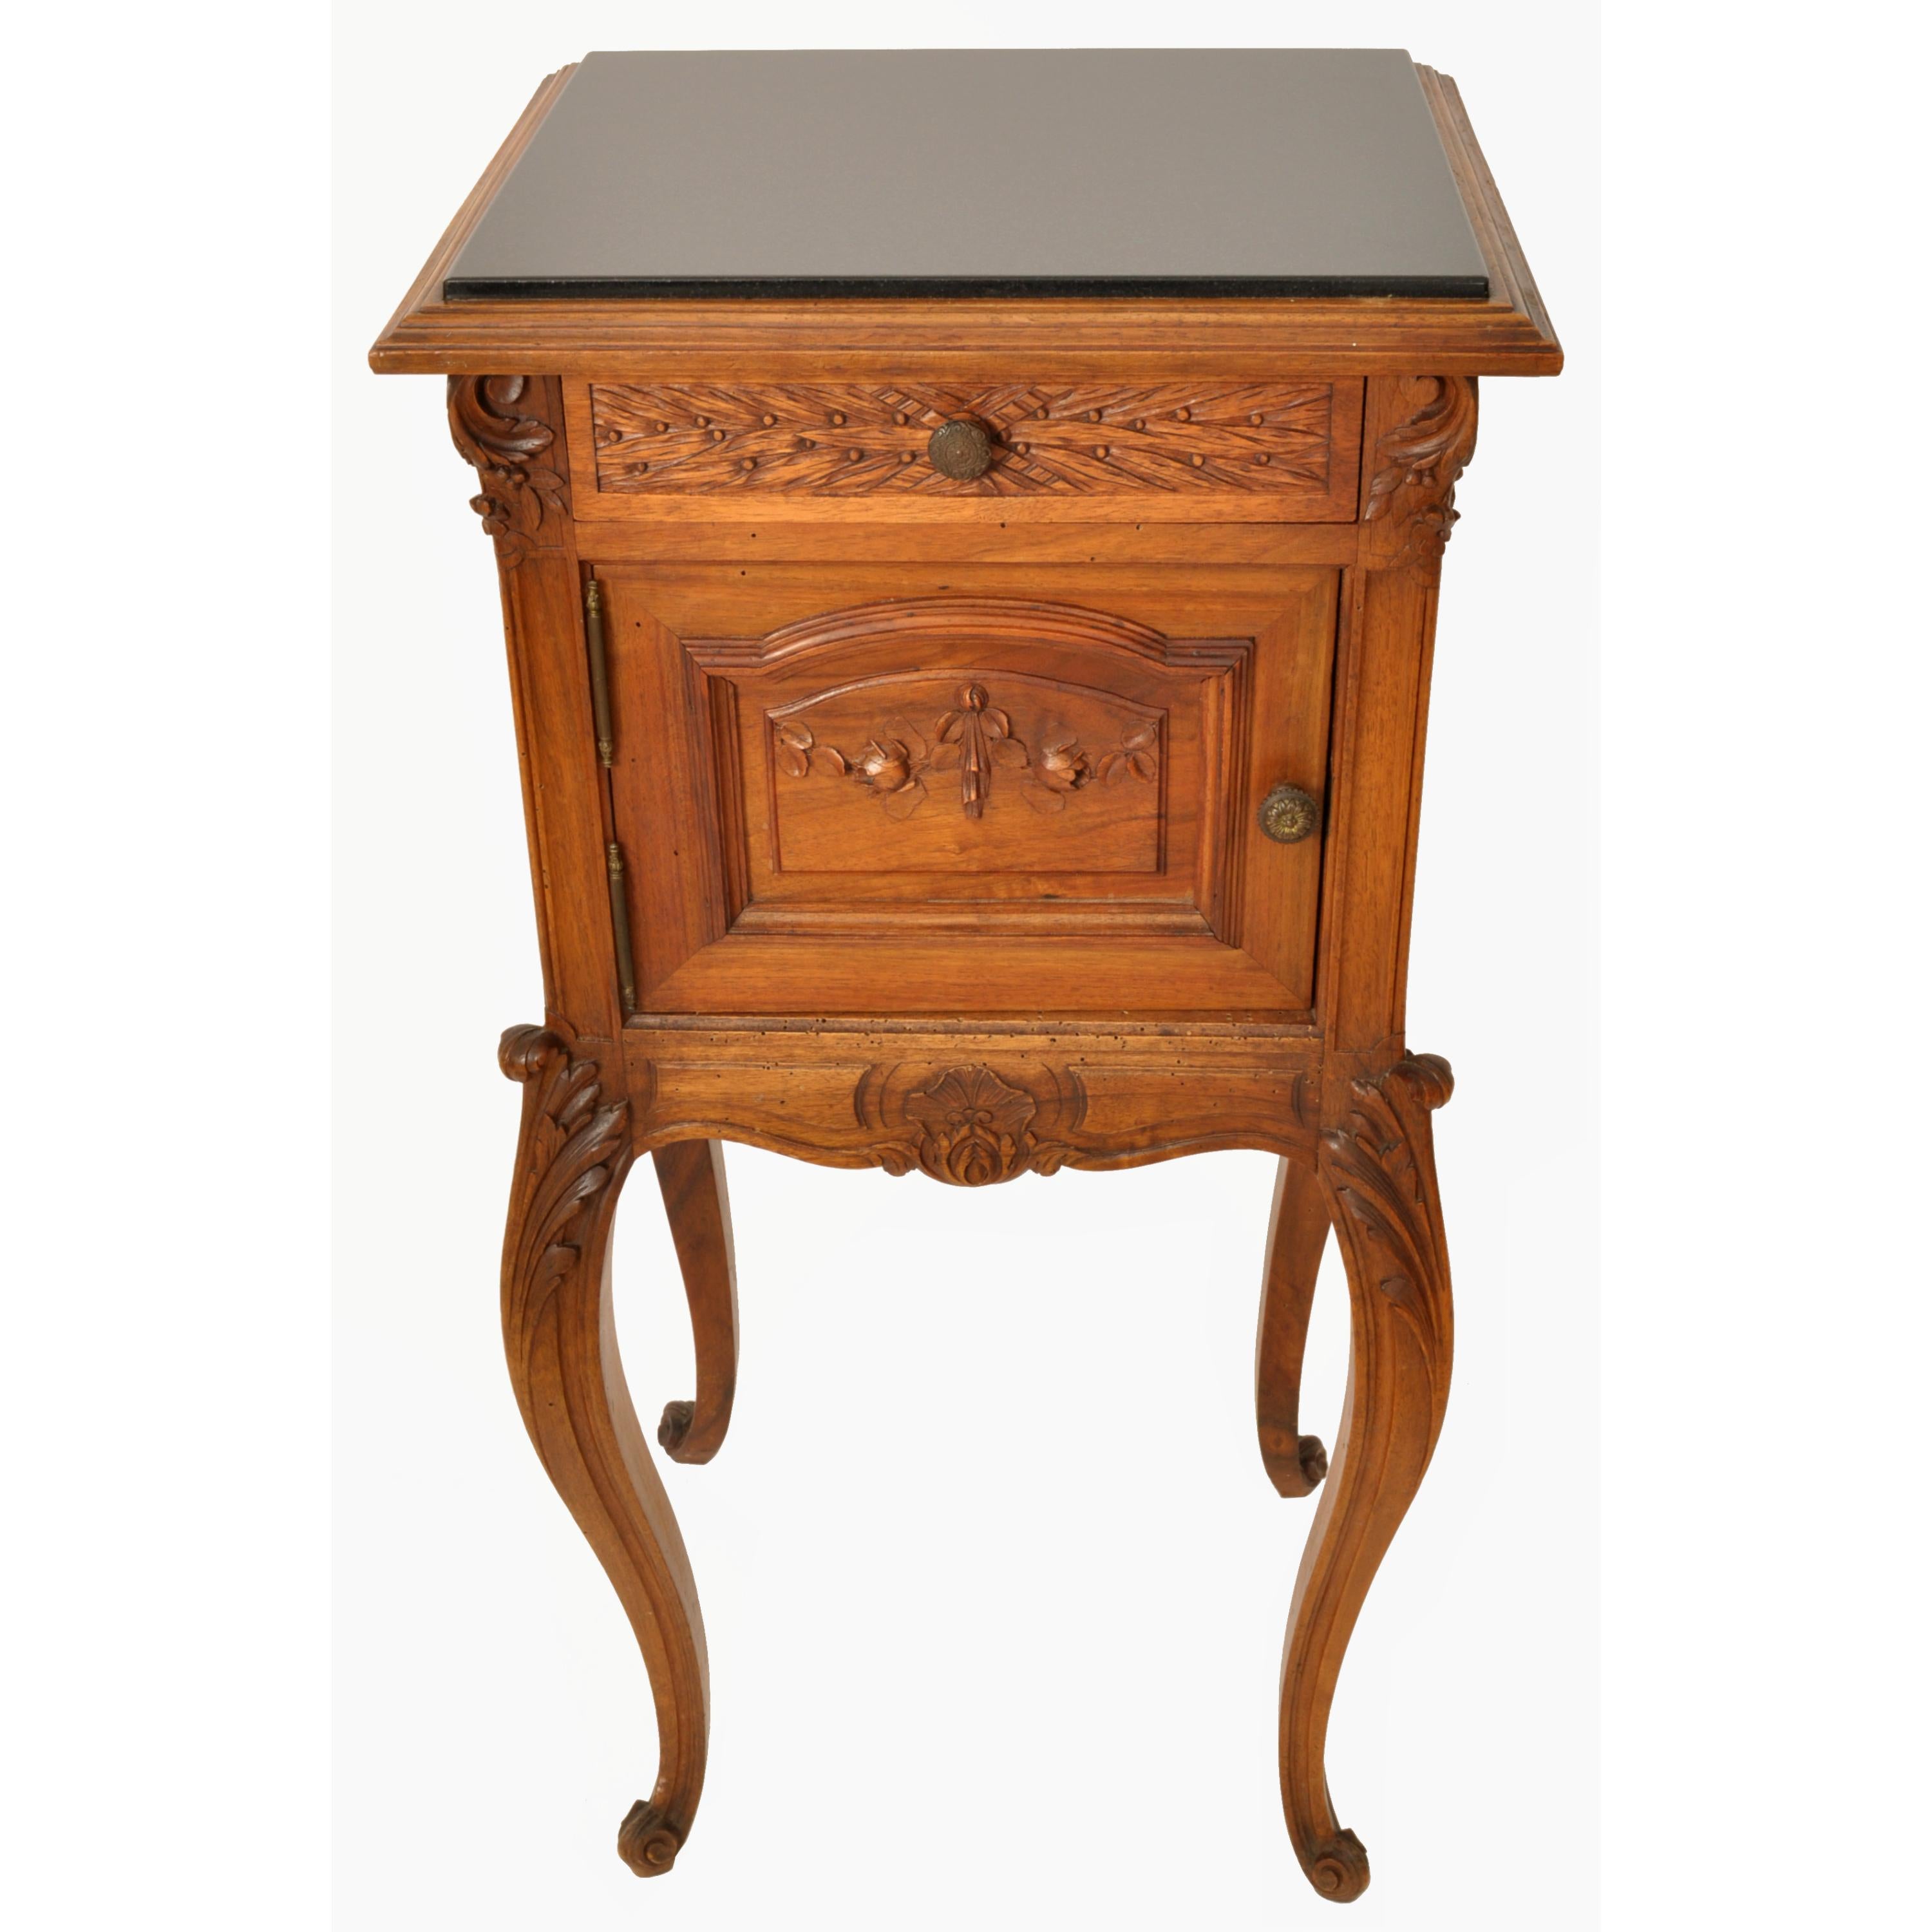 Late 19th Century Antique French Provincial Louis XVI Carved Walnut & Marble Nightstand Table 1880 For Sale